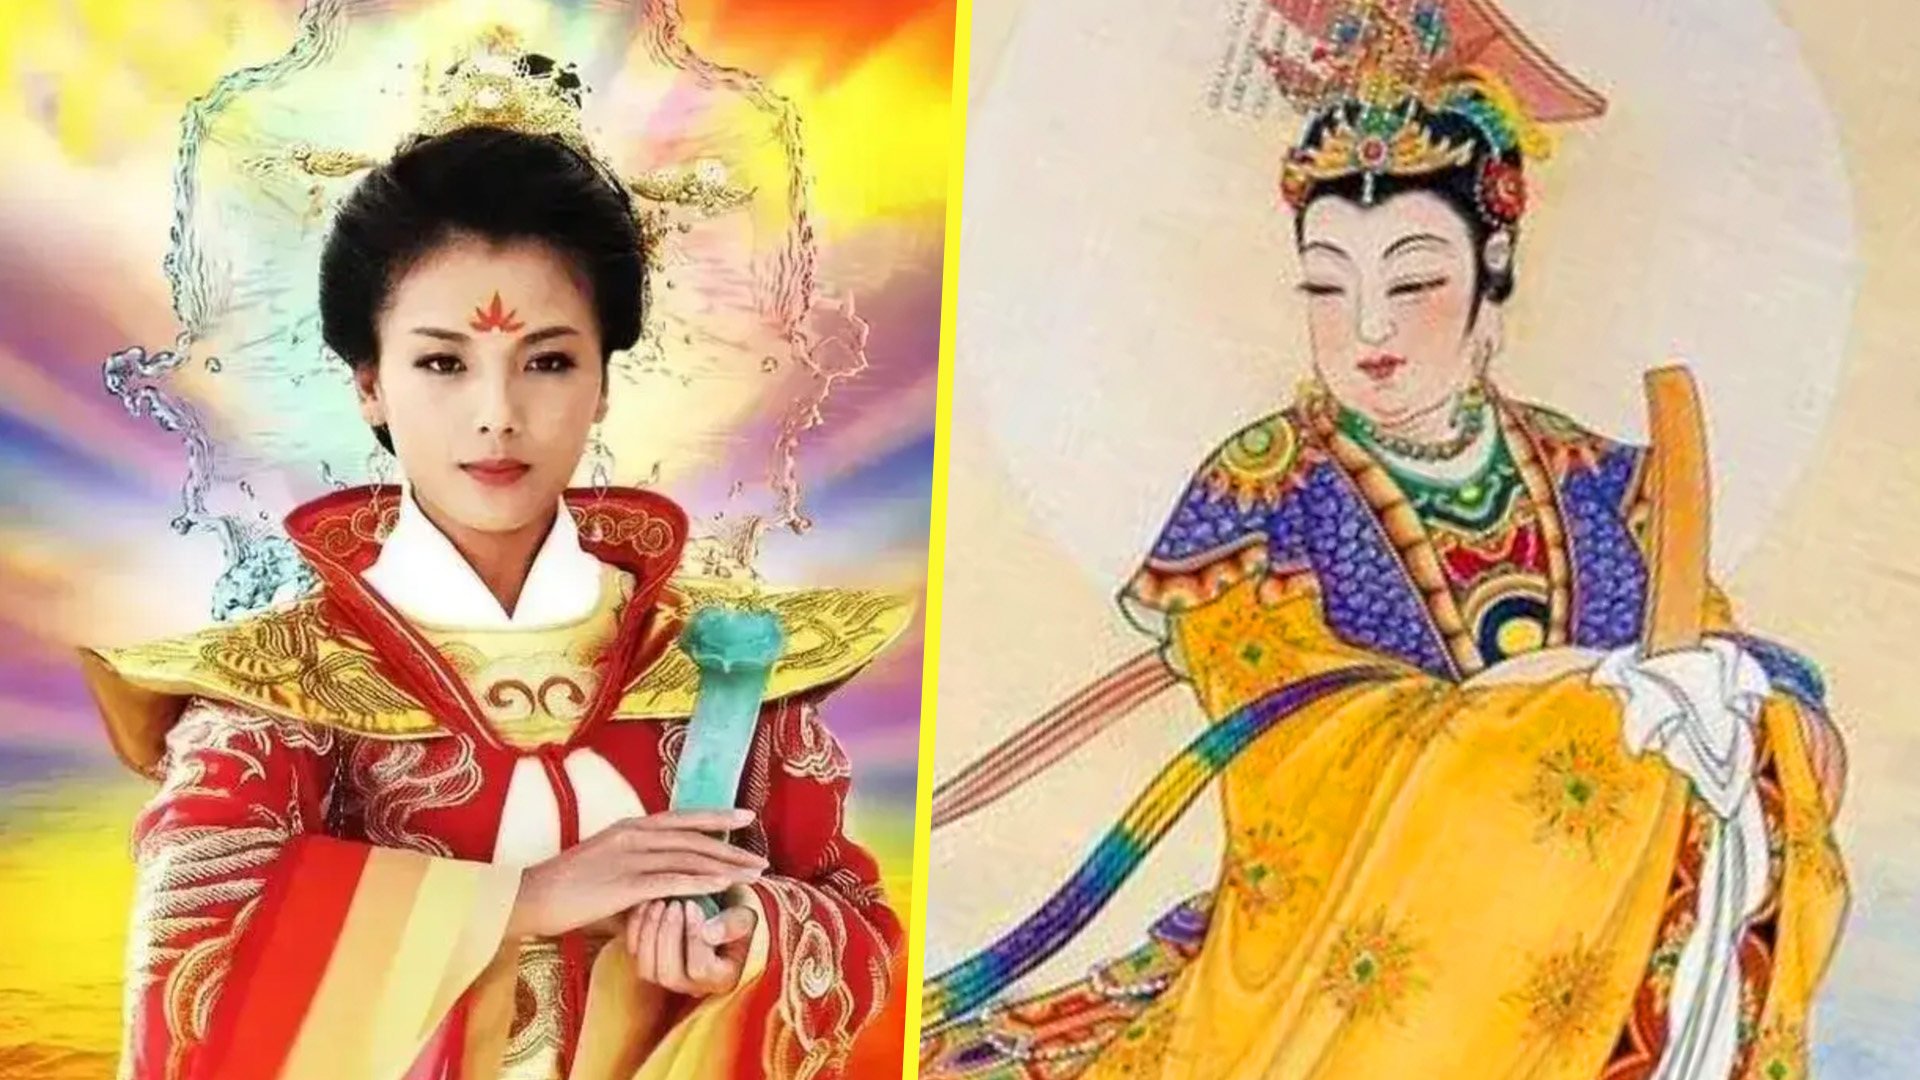 Why is this actress worshipped as sea goddess Mazu in China? Many believe Liu Tao is a living god who protects seafarers. Photo: SCMP composite/Sohu/Zhihu
